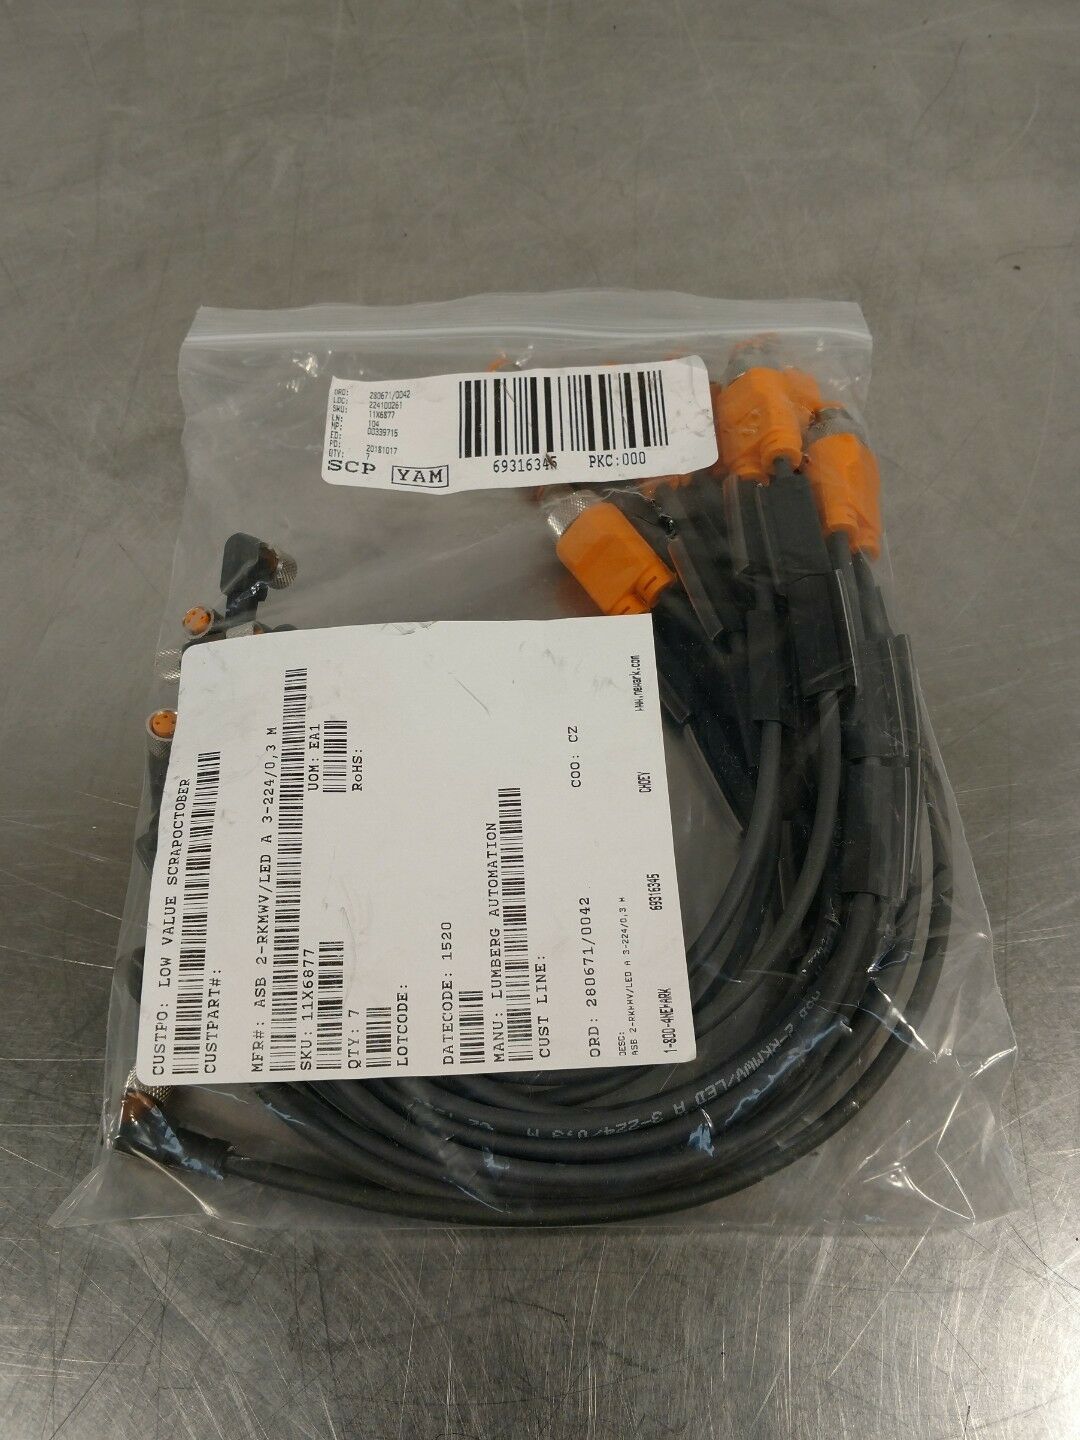 Lumberg Automation ASB 2-RKMWV/LED A 3-224/0 Cables Quantity-7 6A